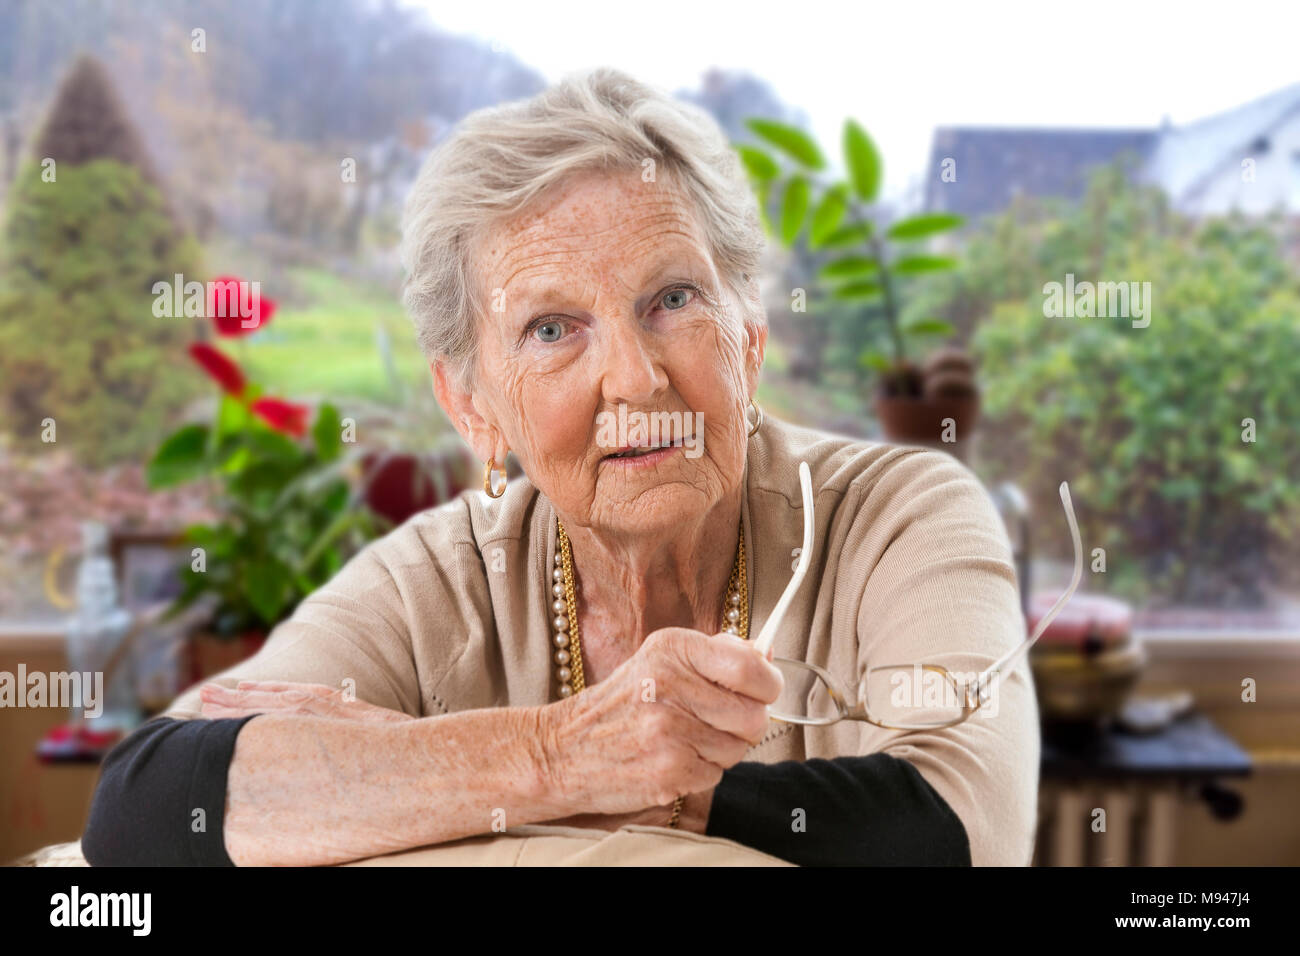 Smiling Senior, grey-haired woman,holdin glasses,looking at camera, in her sitting room, in front of windows onto garden Stock Photo